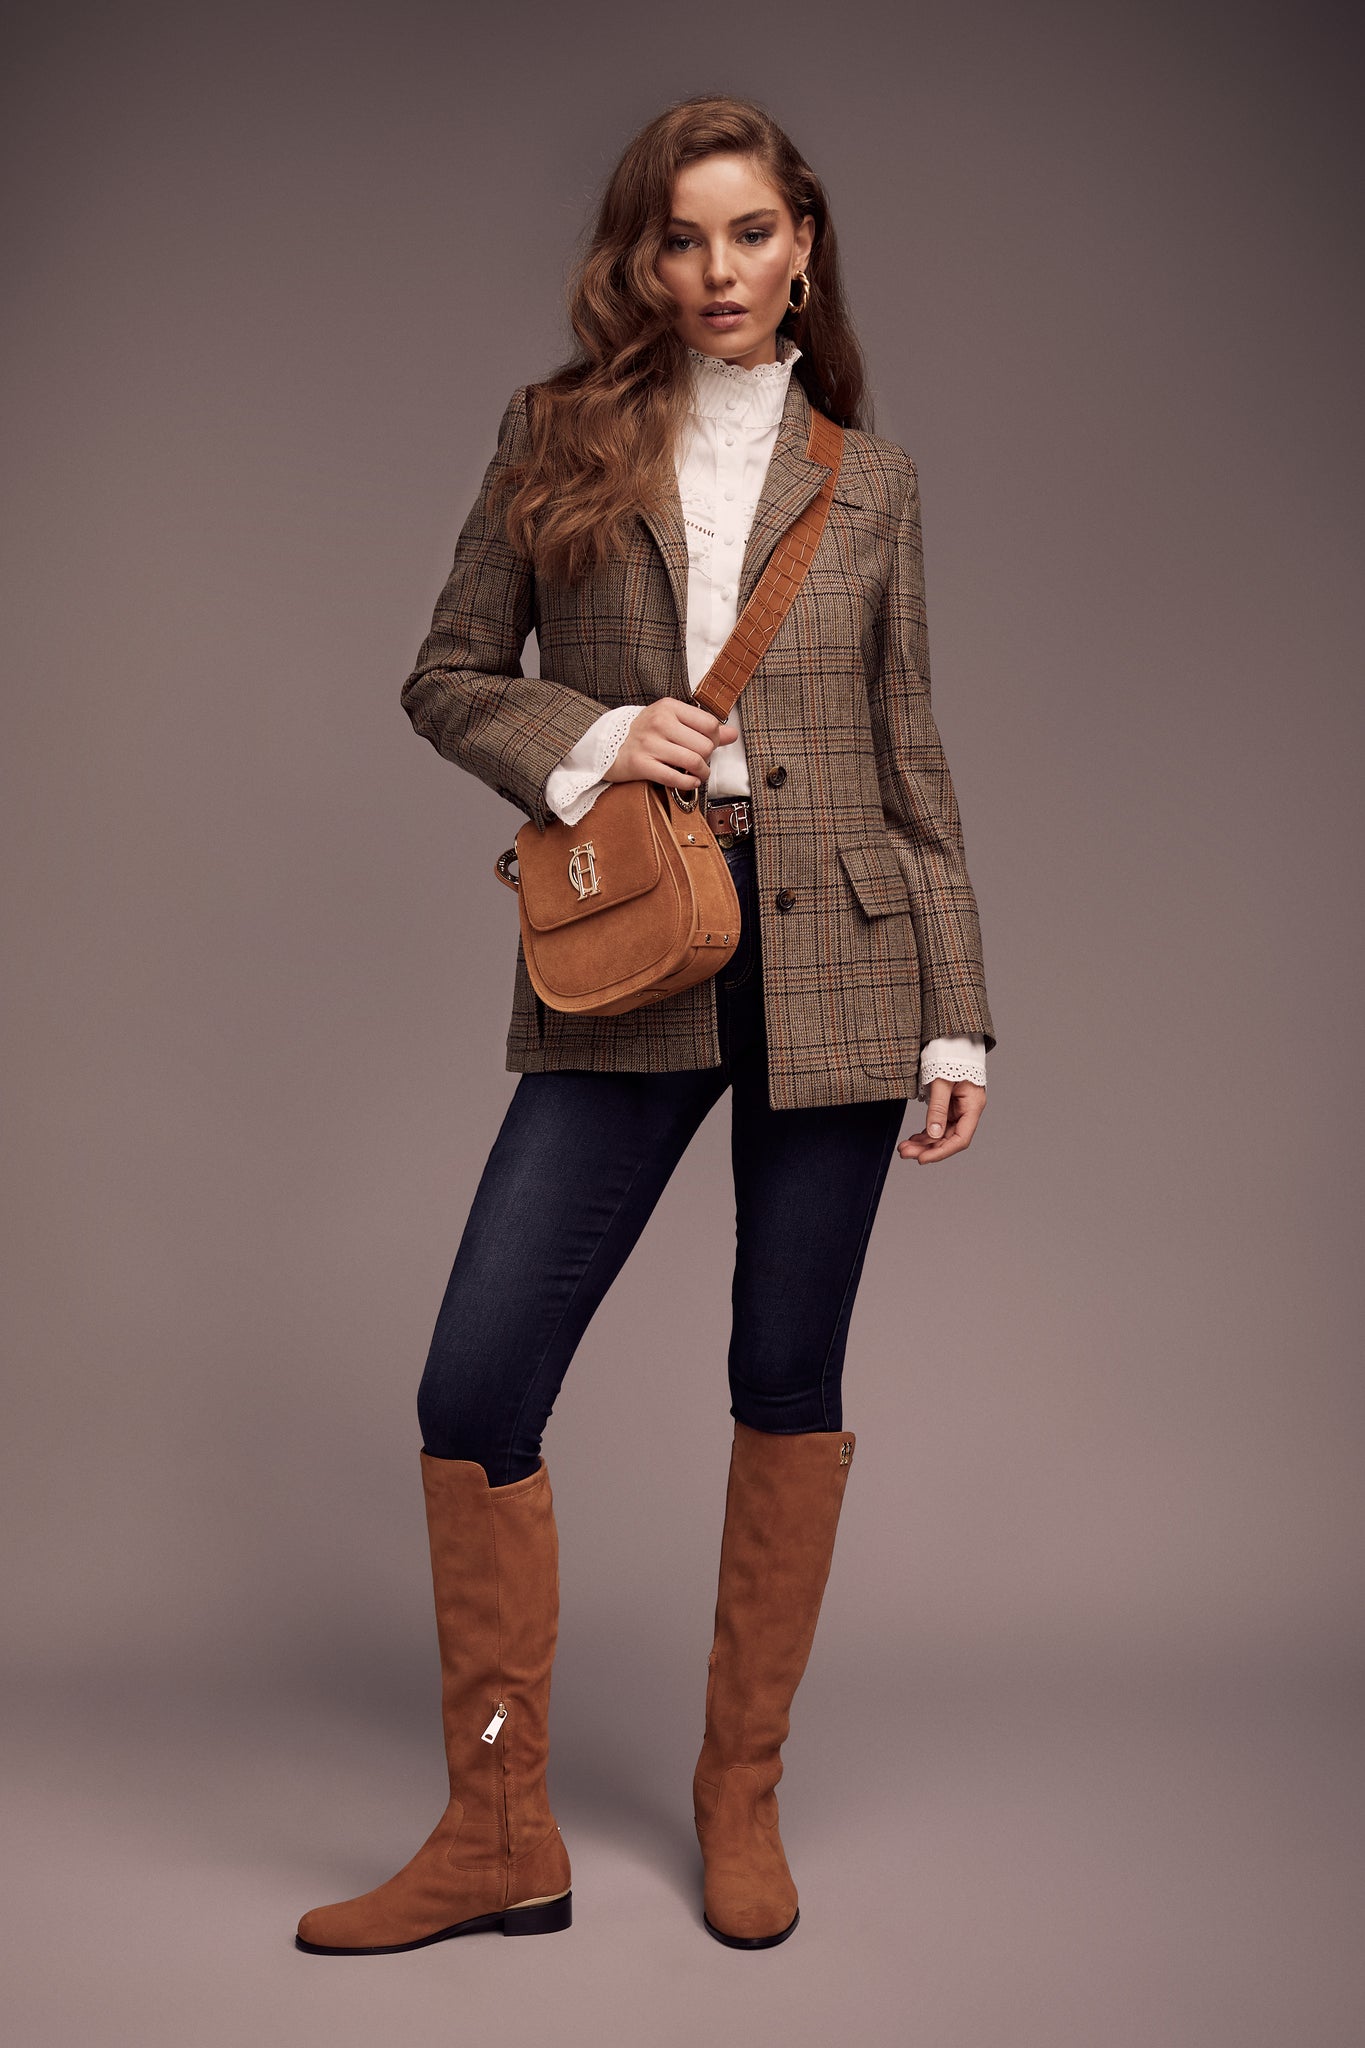 womens classic slim fit single breasted blazer in brown and orange tweed with lower patch pockets with concealed button flap contrast brown suede shoulder gun patch with elbow patches and horn button finish on cuffs and front worn with navy skinny jeans tan knee high boots and white shirt